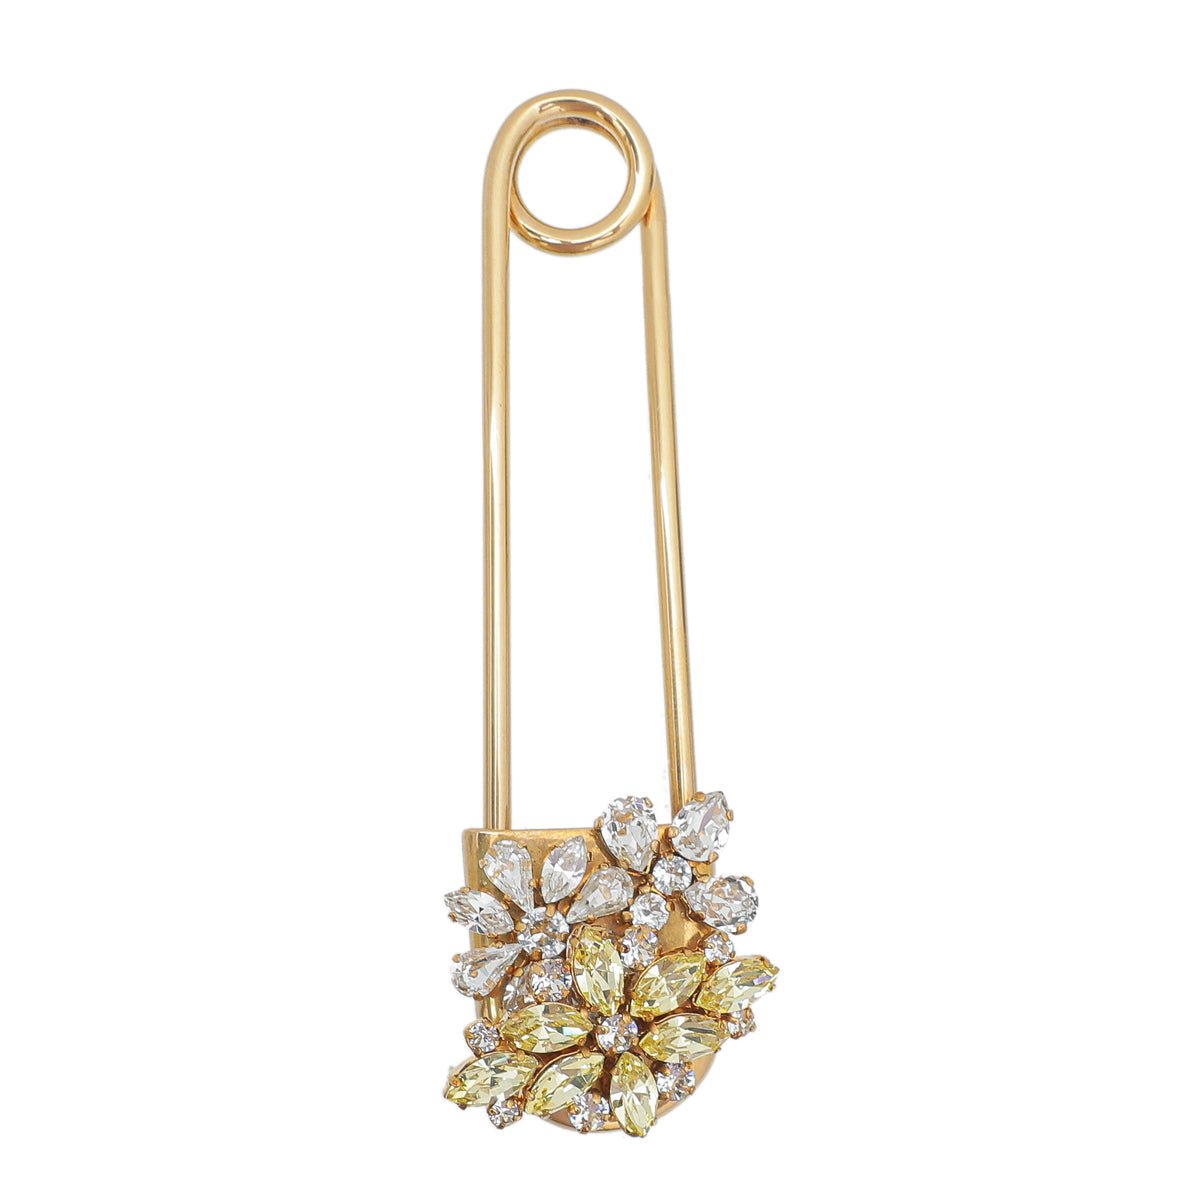 Burberry - Burberry Gold Tone Daisy Crystal Pin Brooch | The Closet